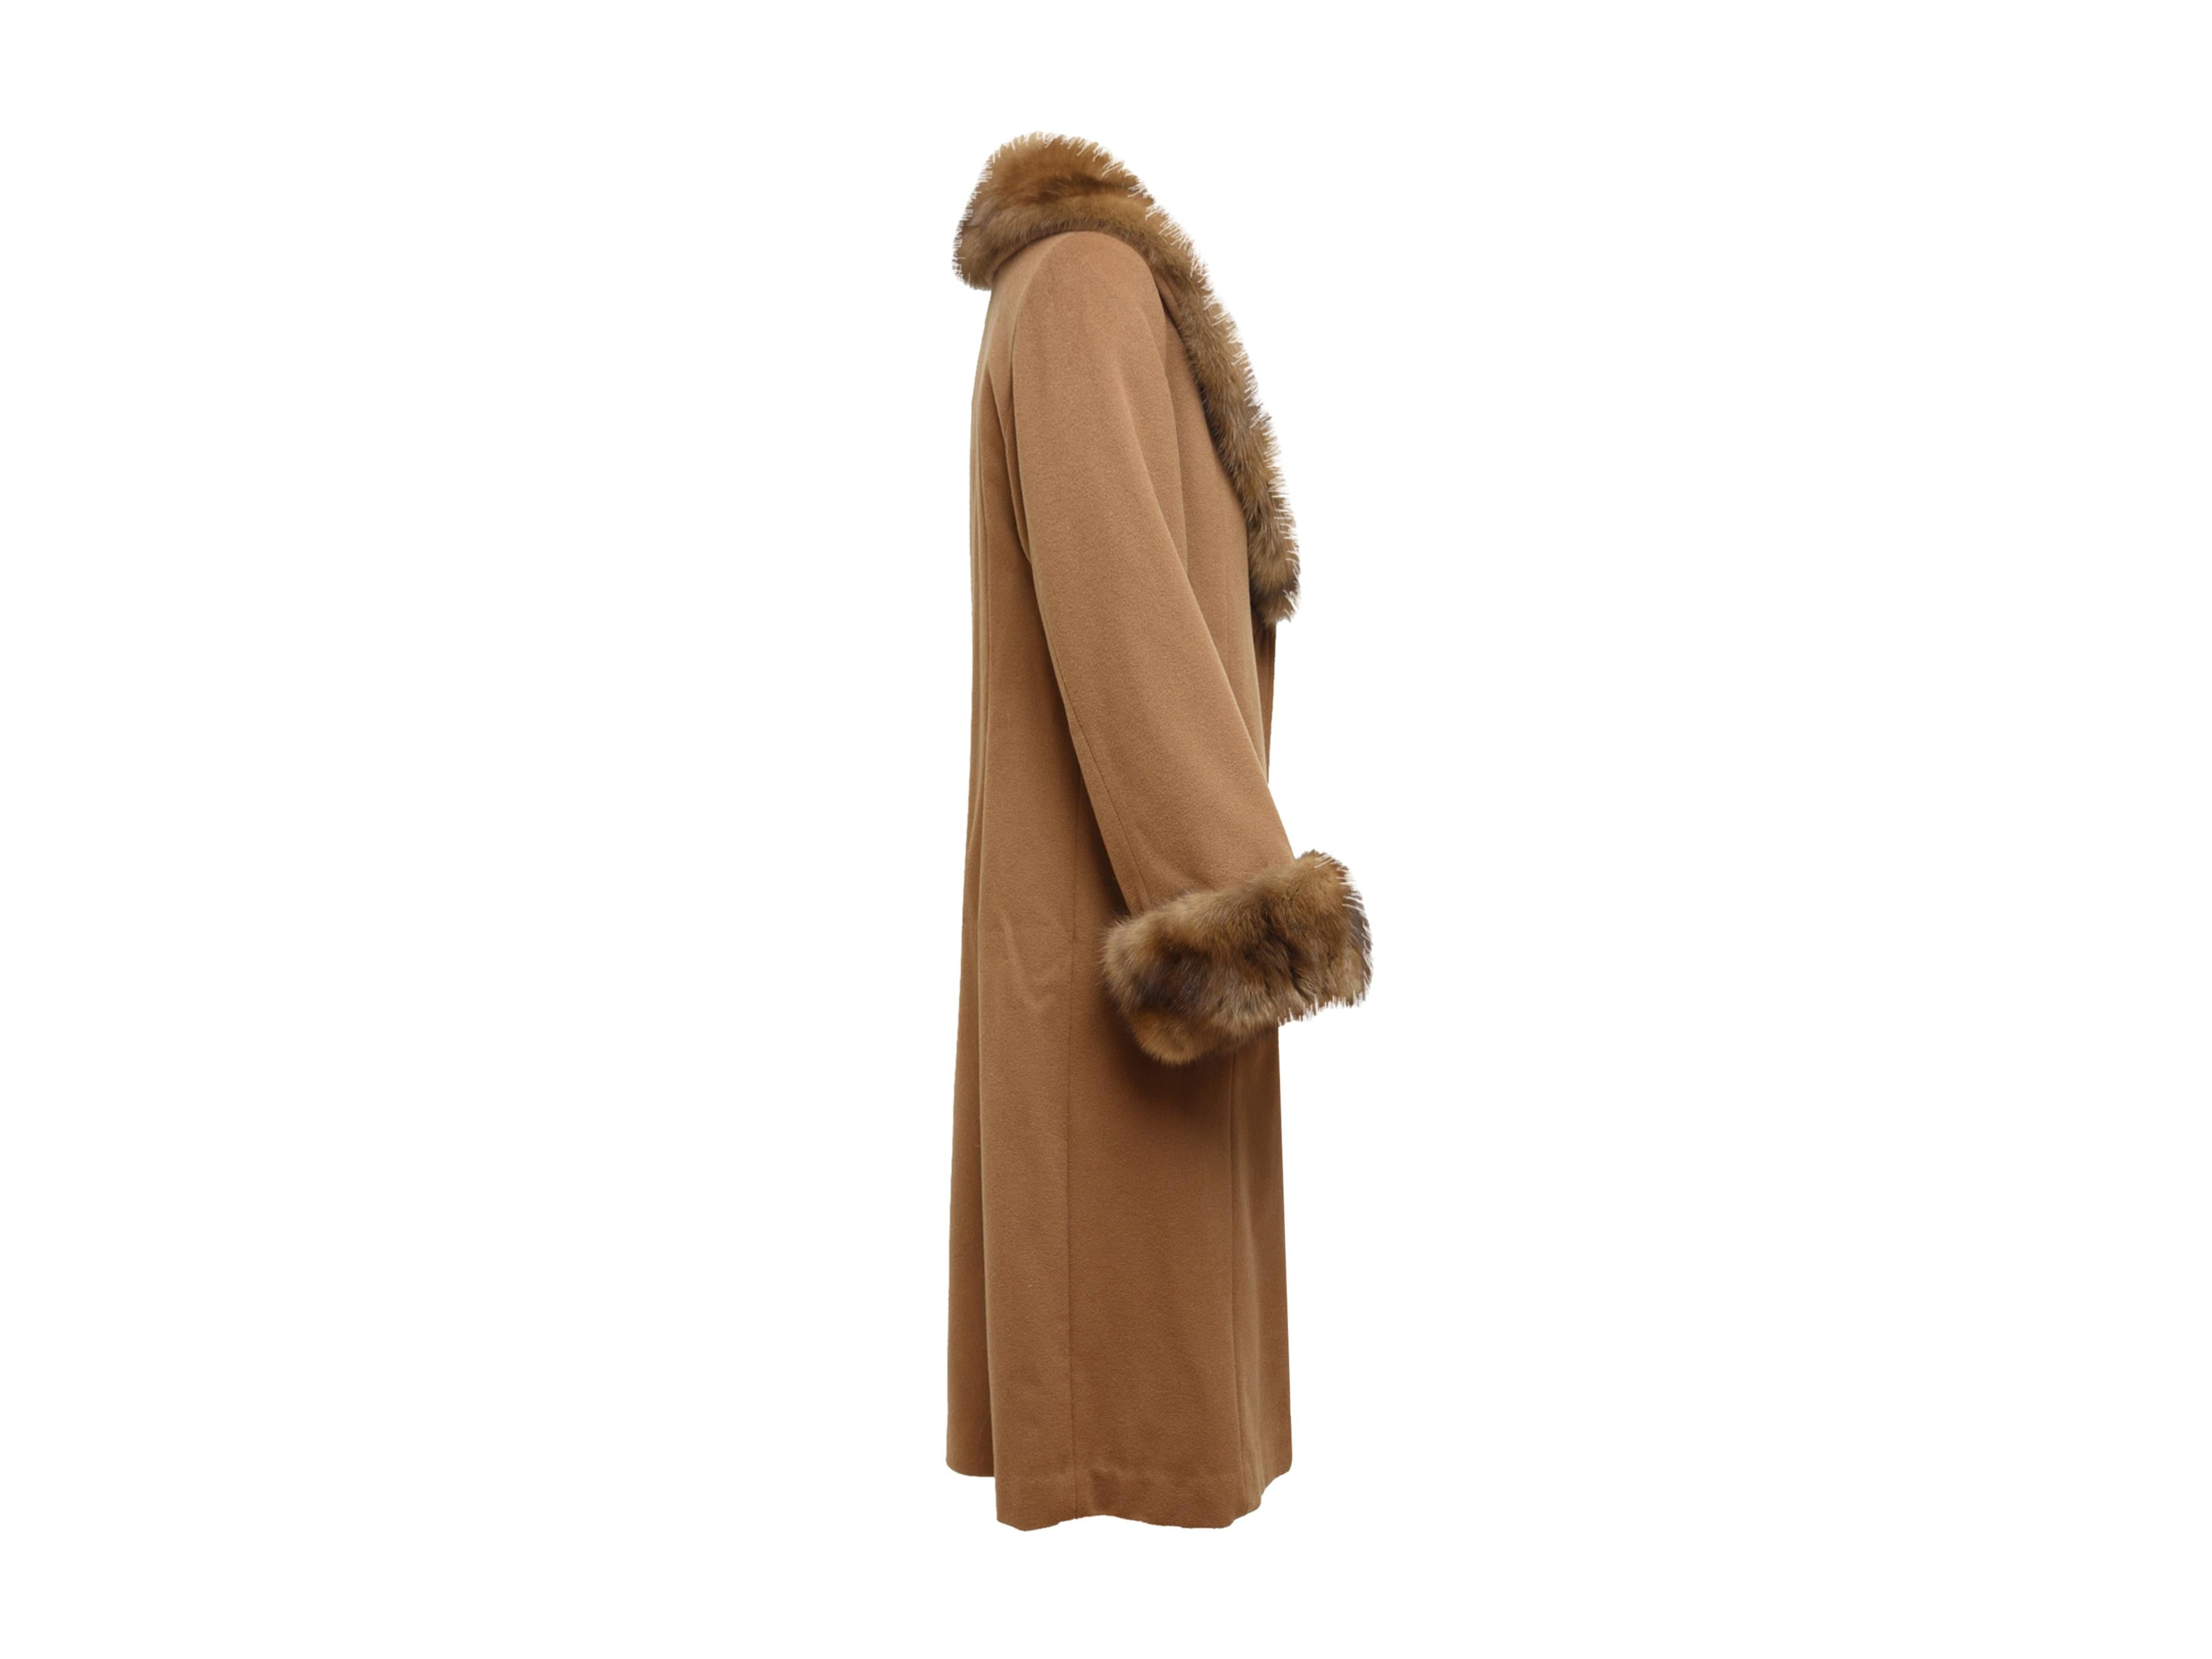 Product details: Brown custom cashmere winter coat made with authentic Loro Piana material. Sable fur trim throughout. Long sleeves. Dual pockets at hips. Button closures at center front. 36